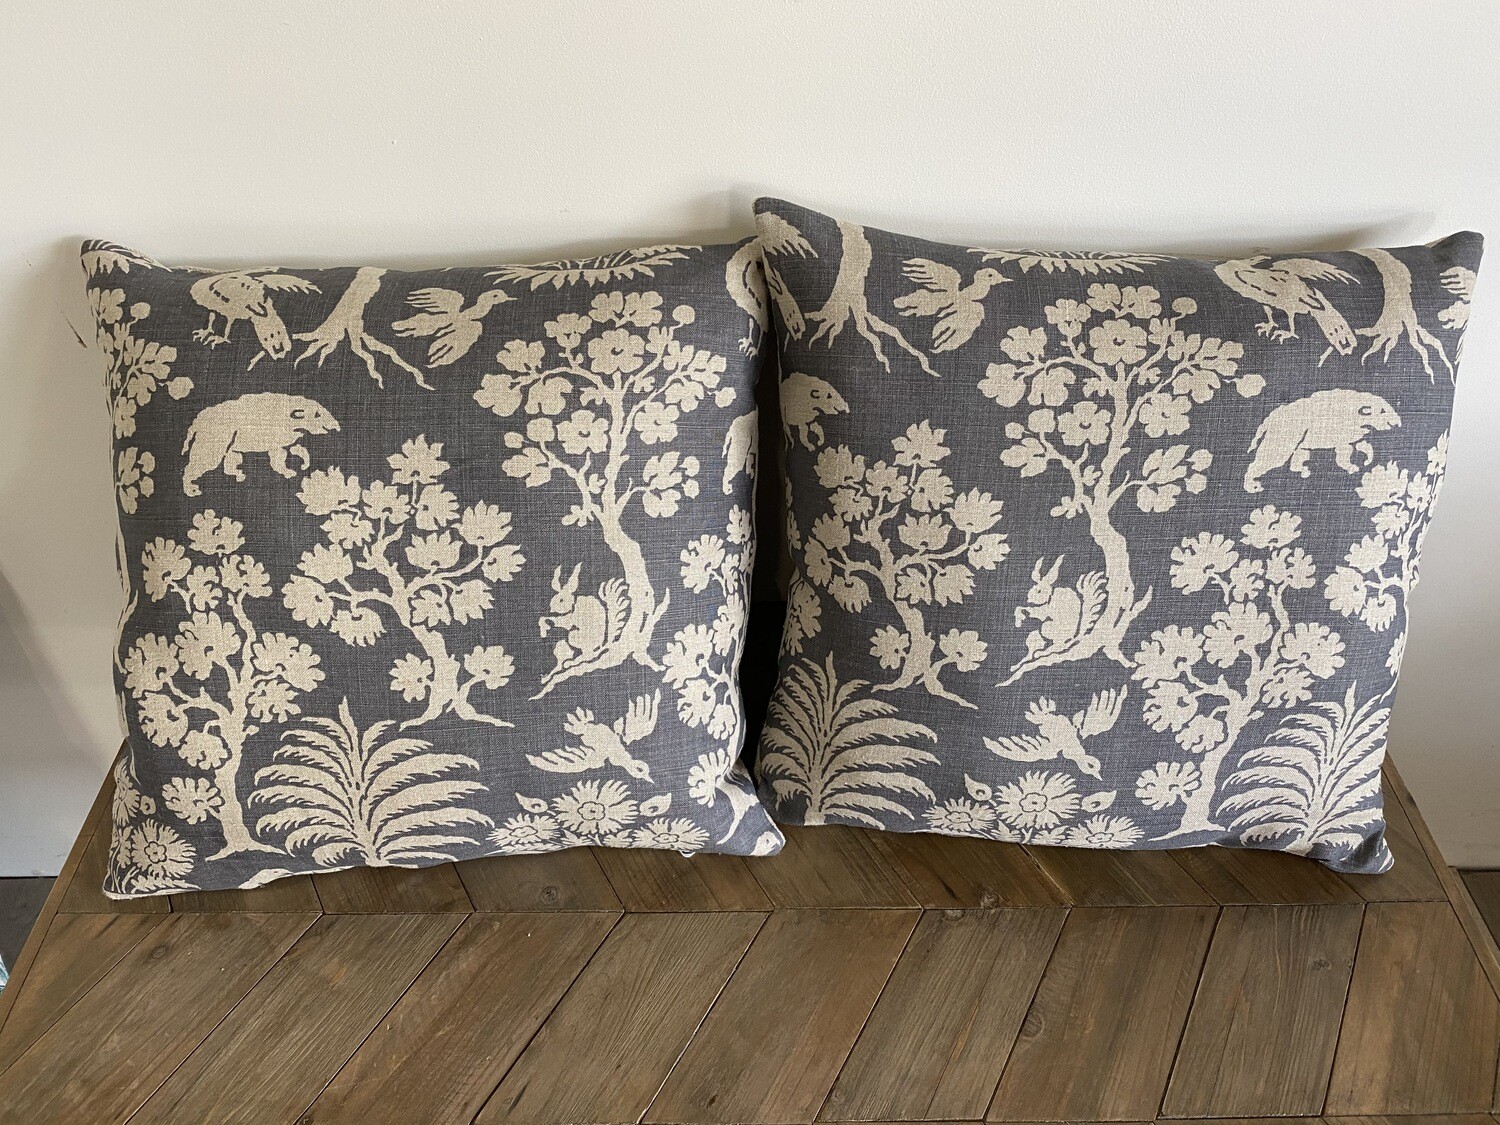 Scatter cushion in a linen print of forest animals